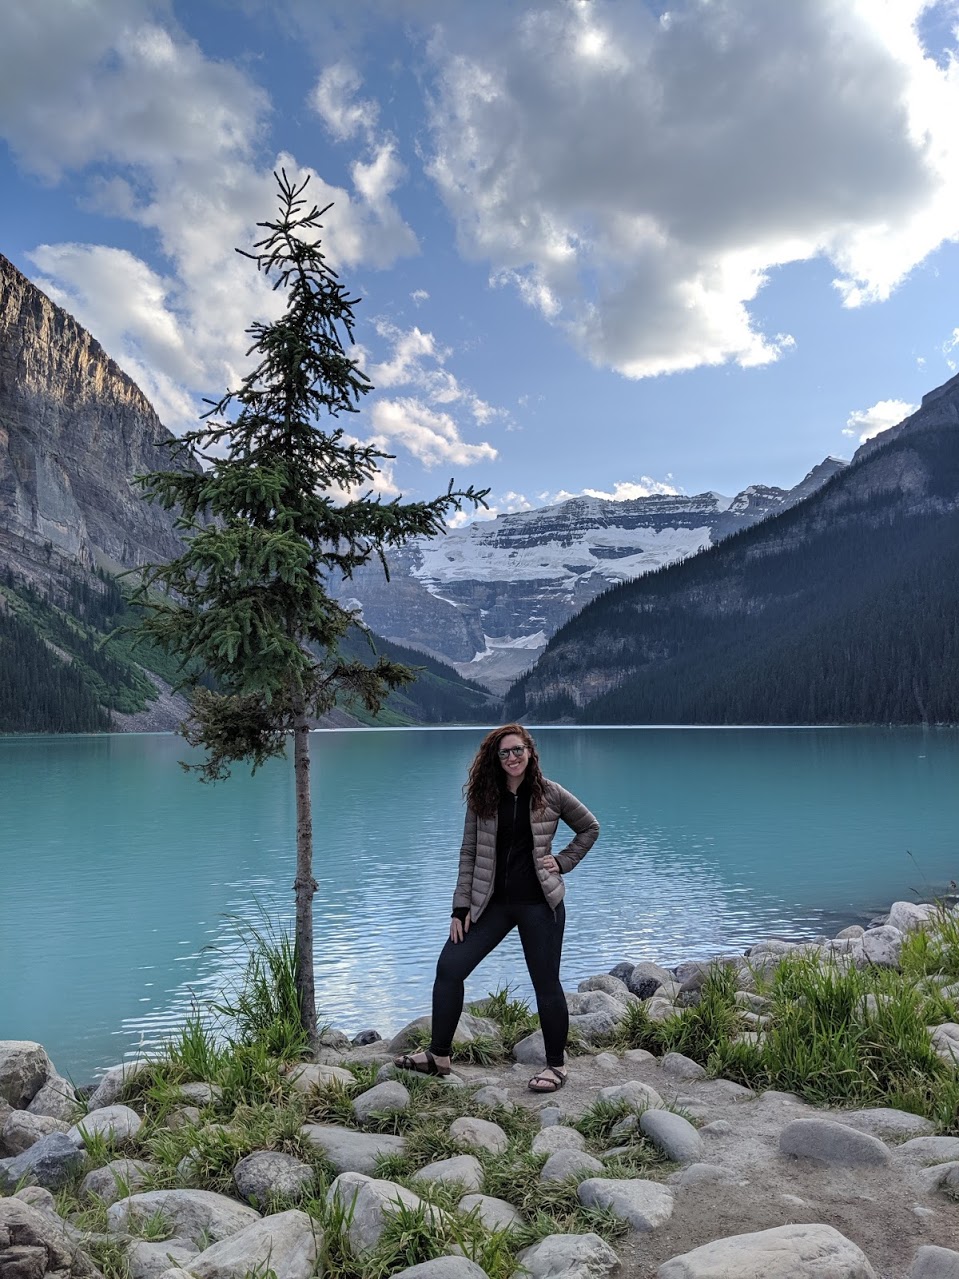 Jen standing in front of a beautiful blue lake with mountains in the background.